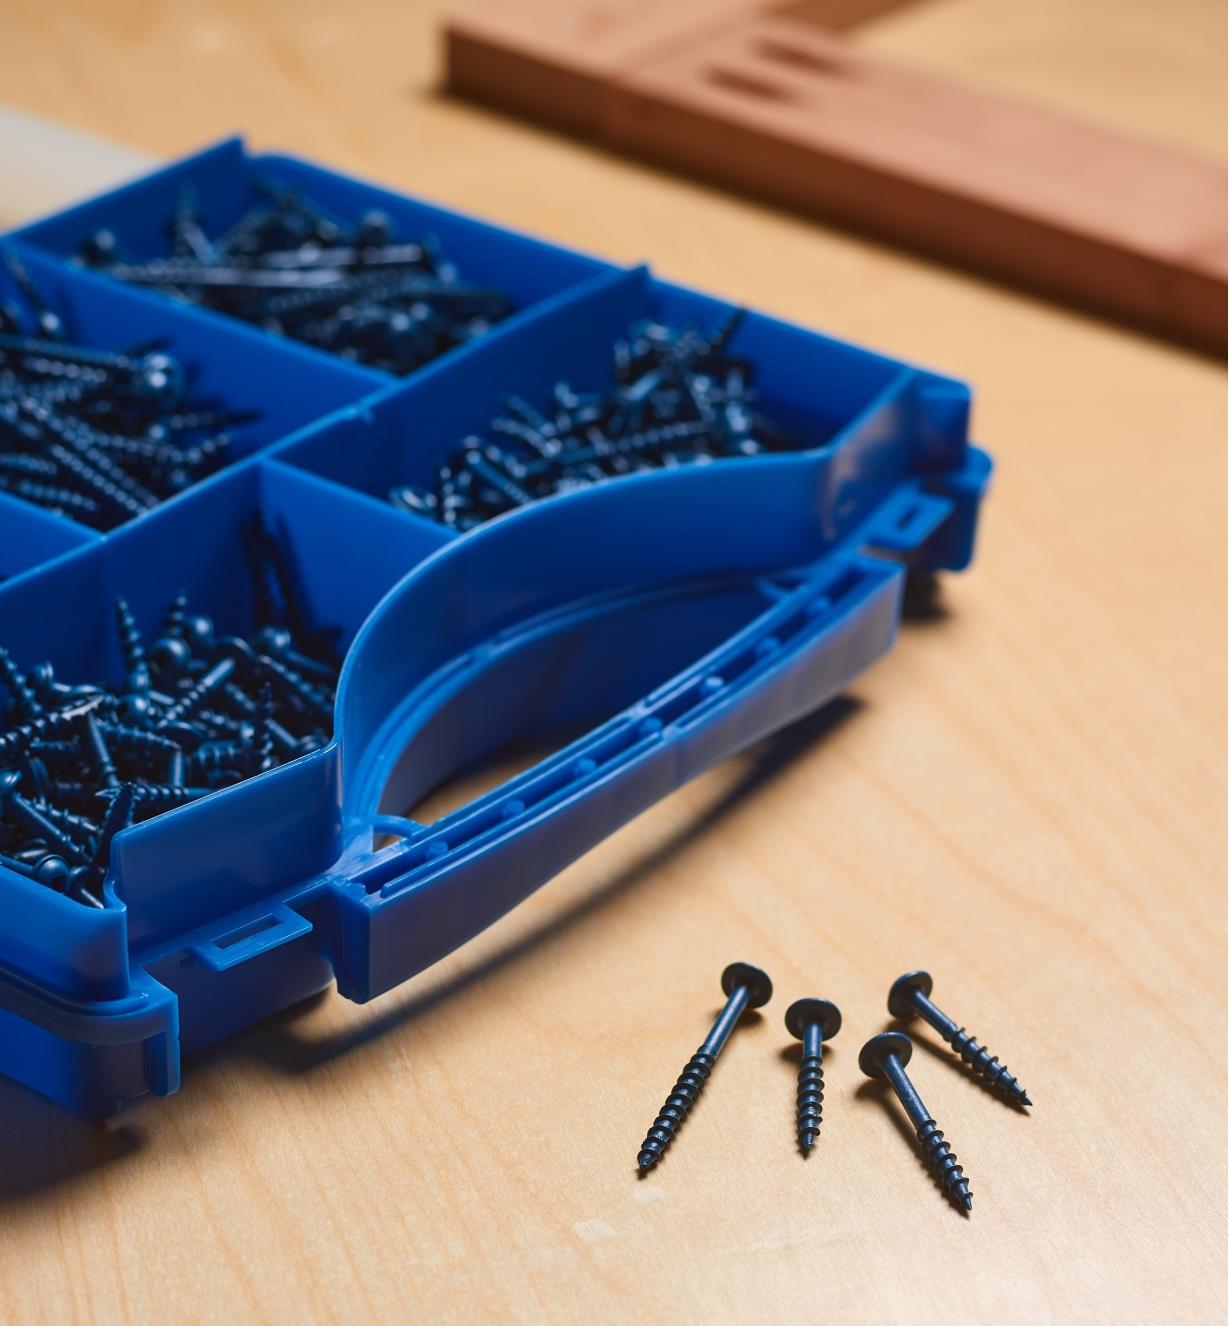 Screws organized in the portable divider case of the Kreg outdoor pocket-hole screw set